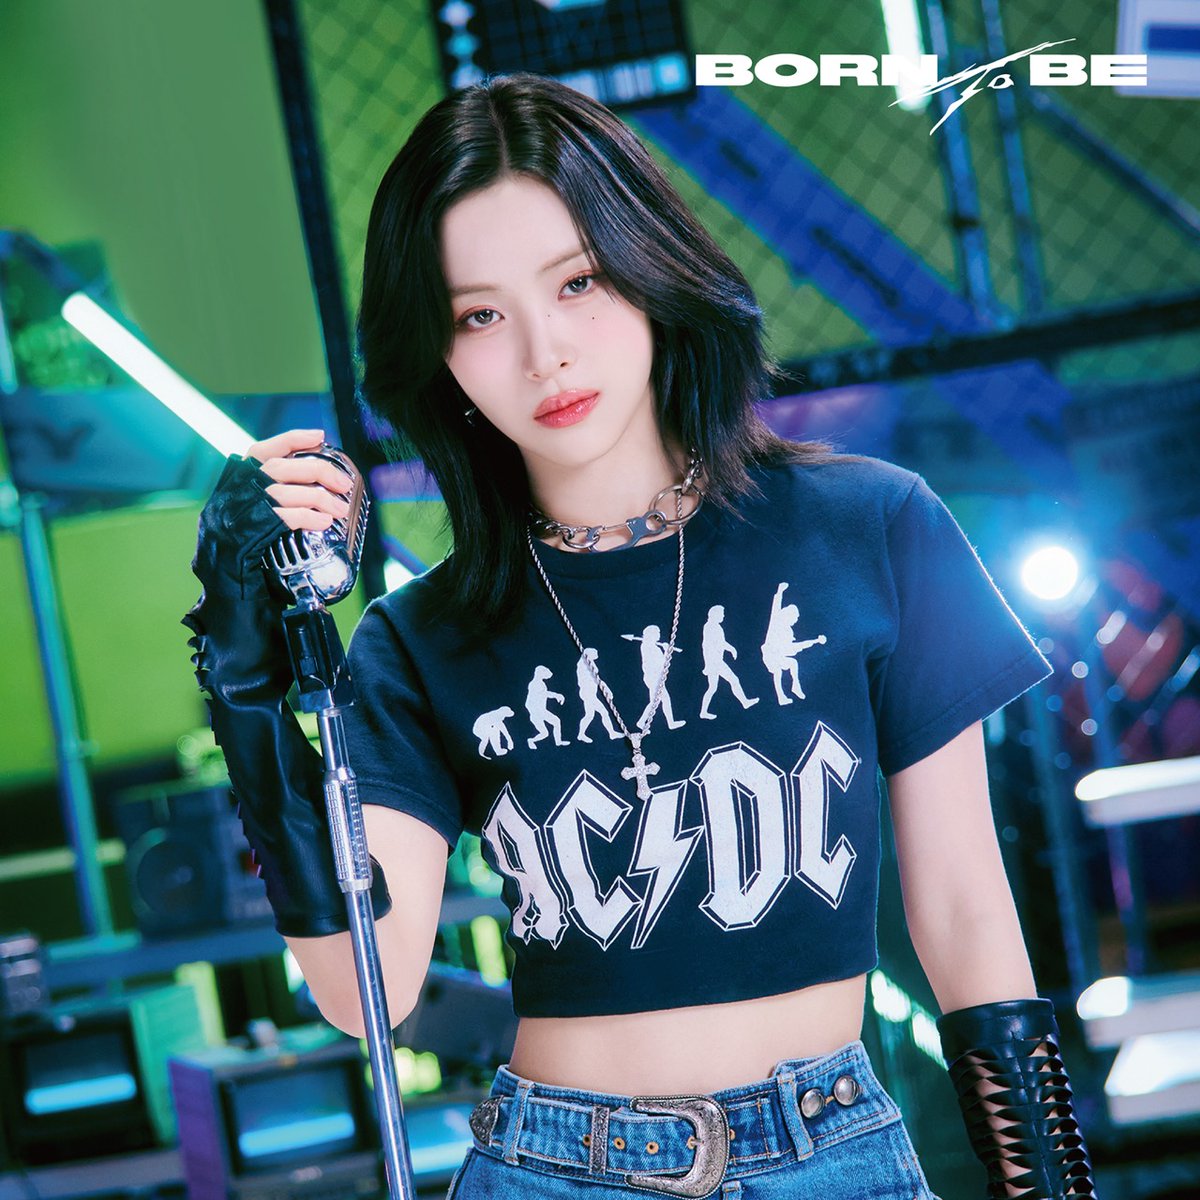 ITZY 2ND WORLD TOUR ＜BORN TO BE＞ in JAPAN

D-3

#ITZY #BORN_TO_BE #MIDZY
#ITZY_2ND_WORLD_TOUR